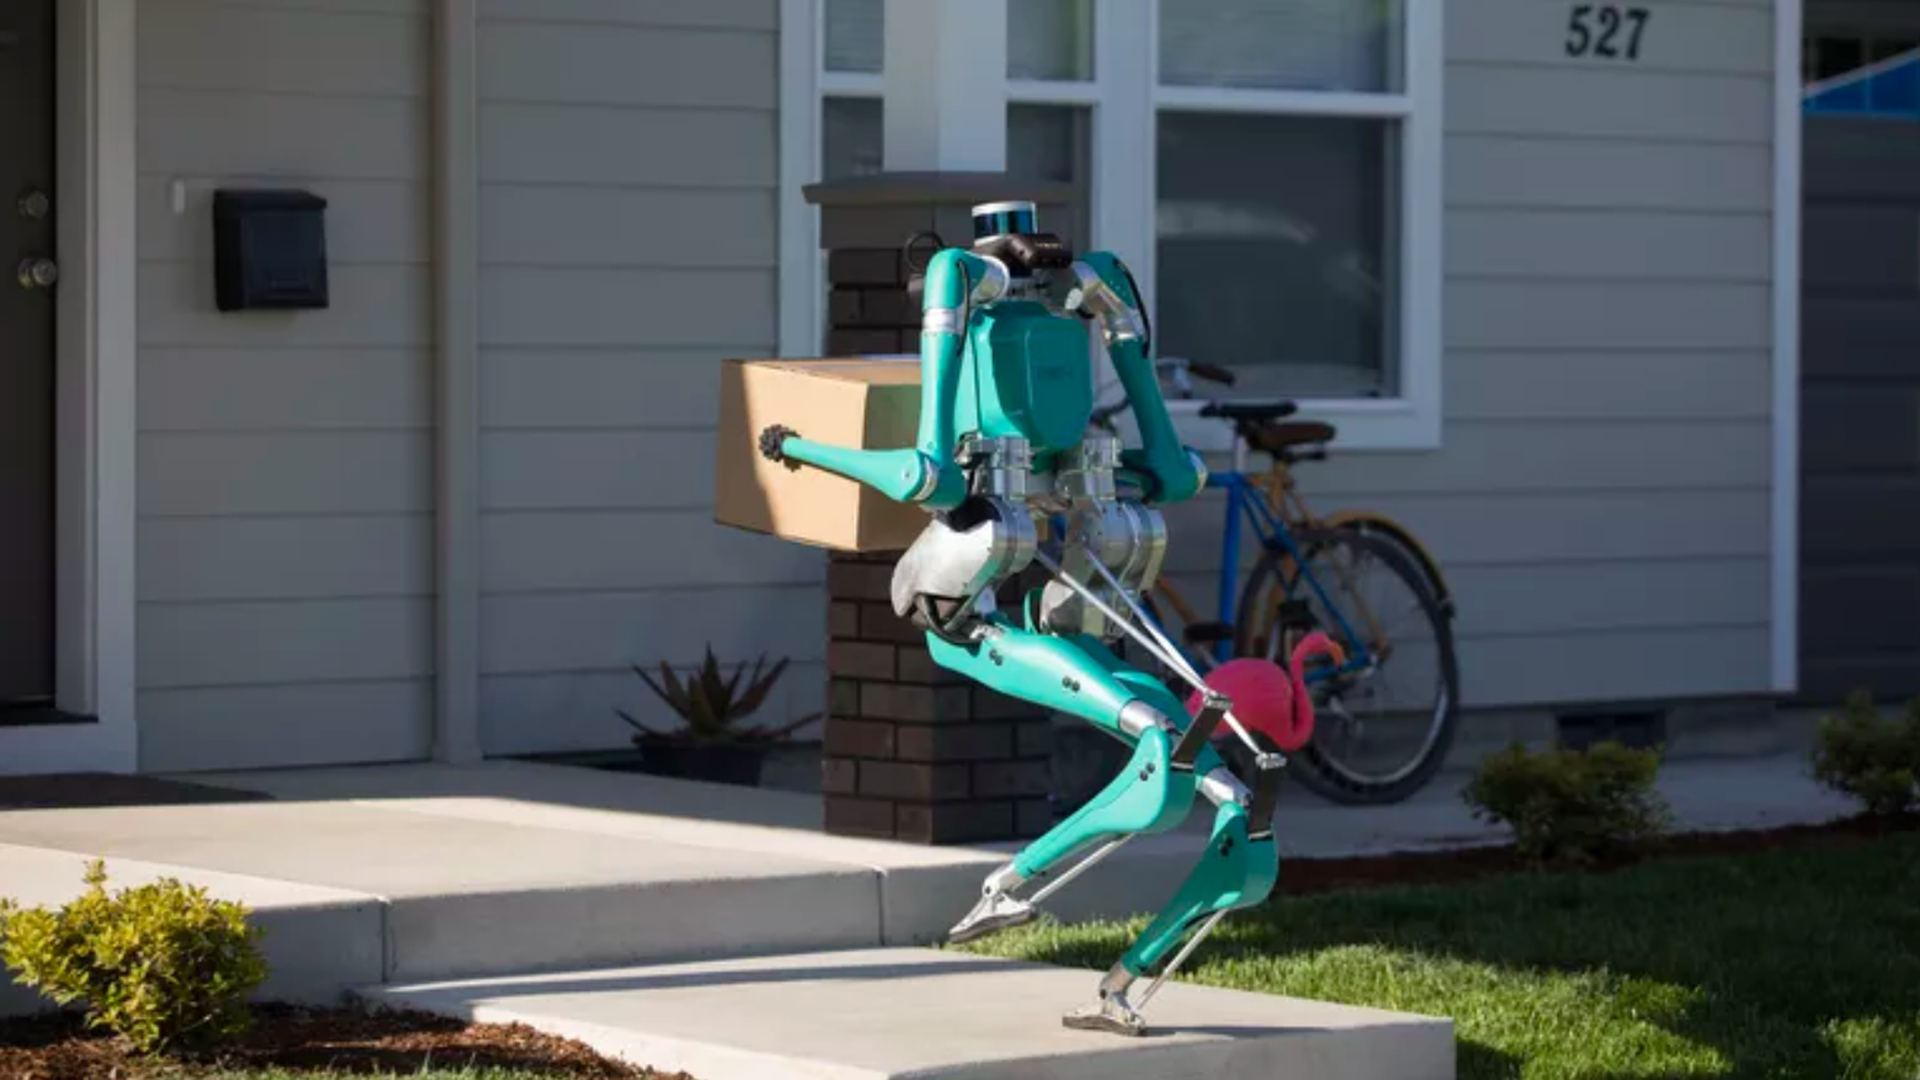 In this image, Digit delivers a package on someone's front porch.